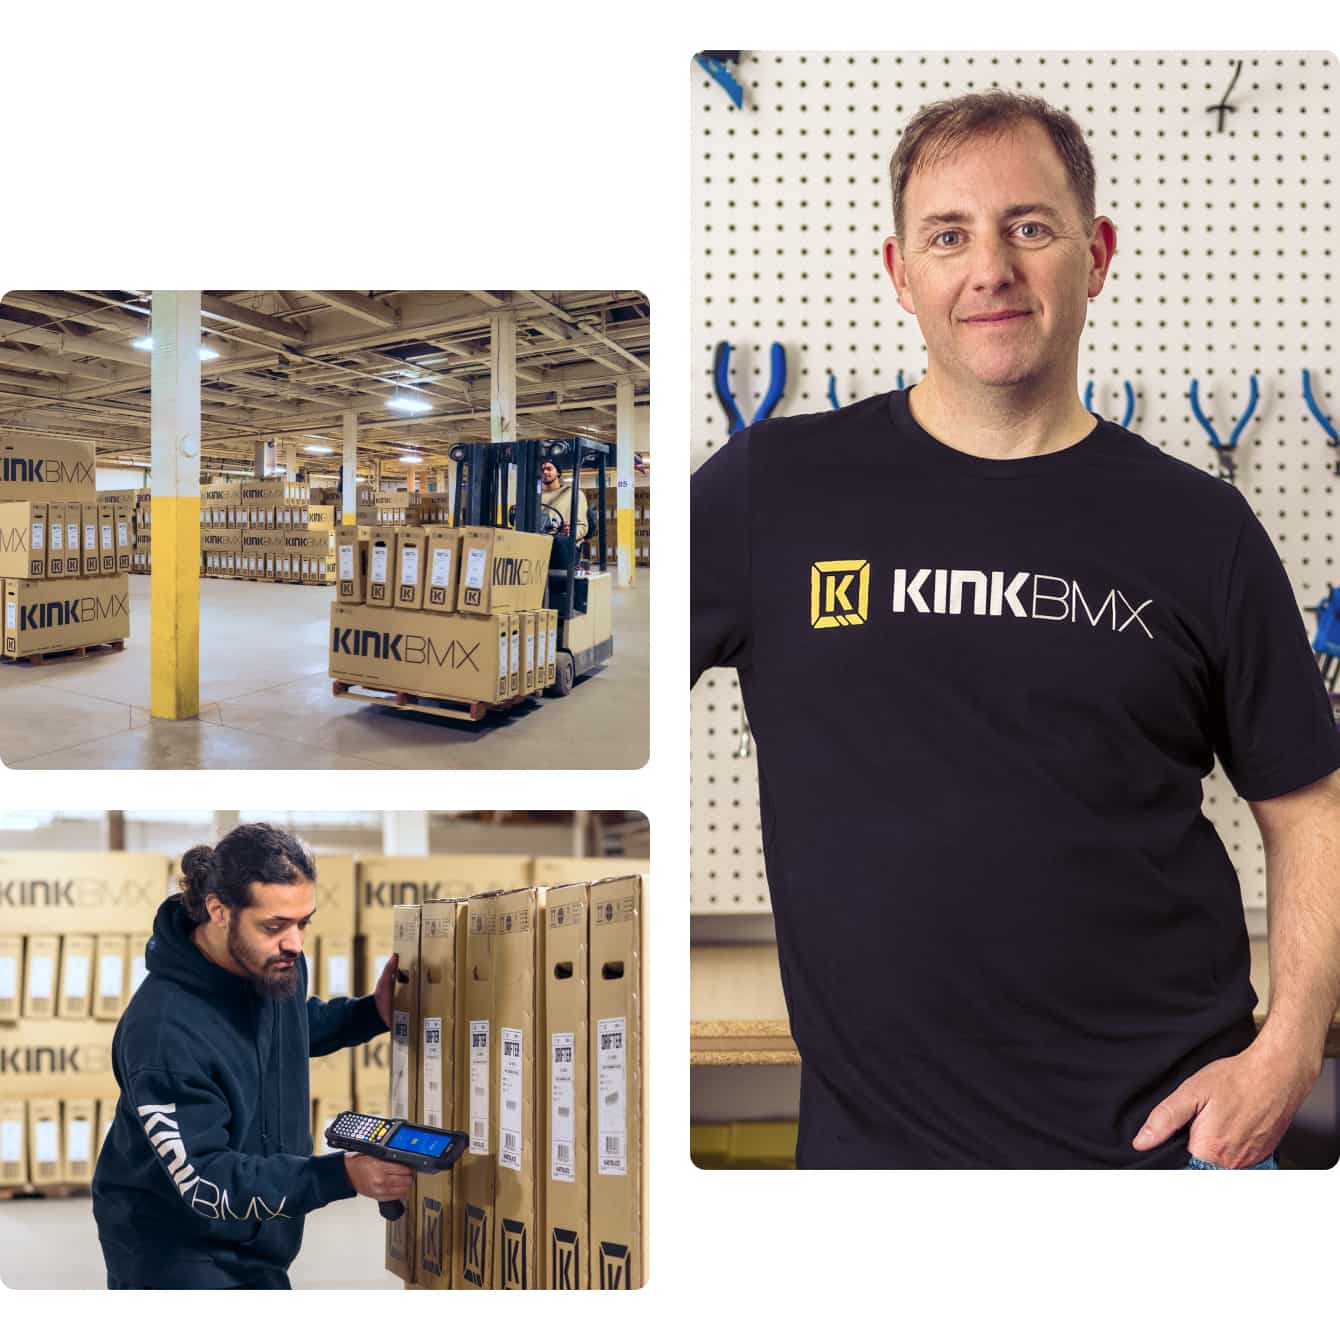 QuickBooks Enterprise customer KinkBMX image mosaic showing man driving forklift in warehouse, man barcode scanning product inventory, and employee standing confidently